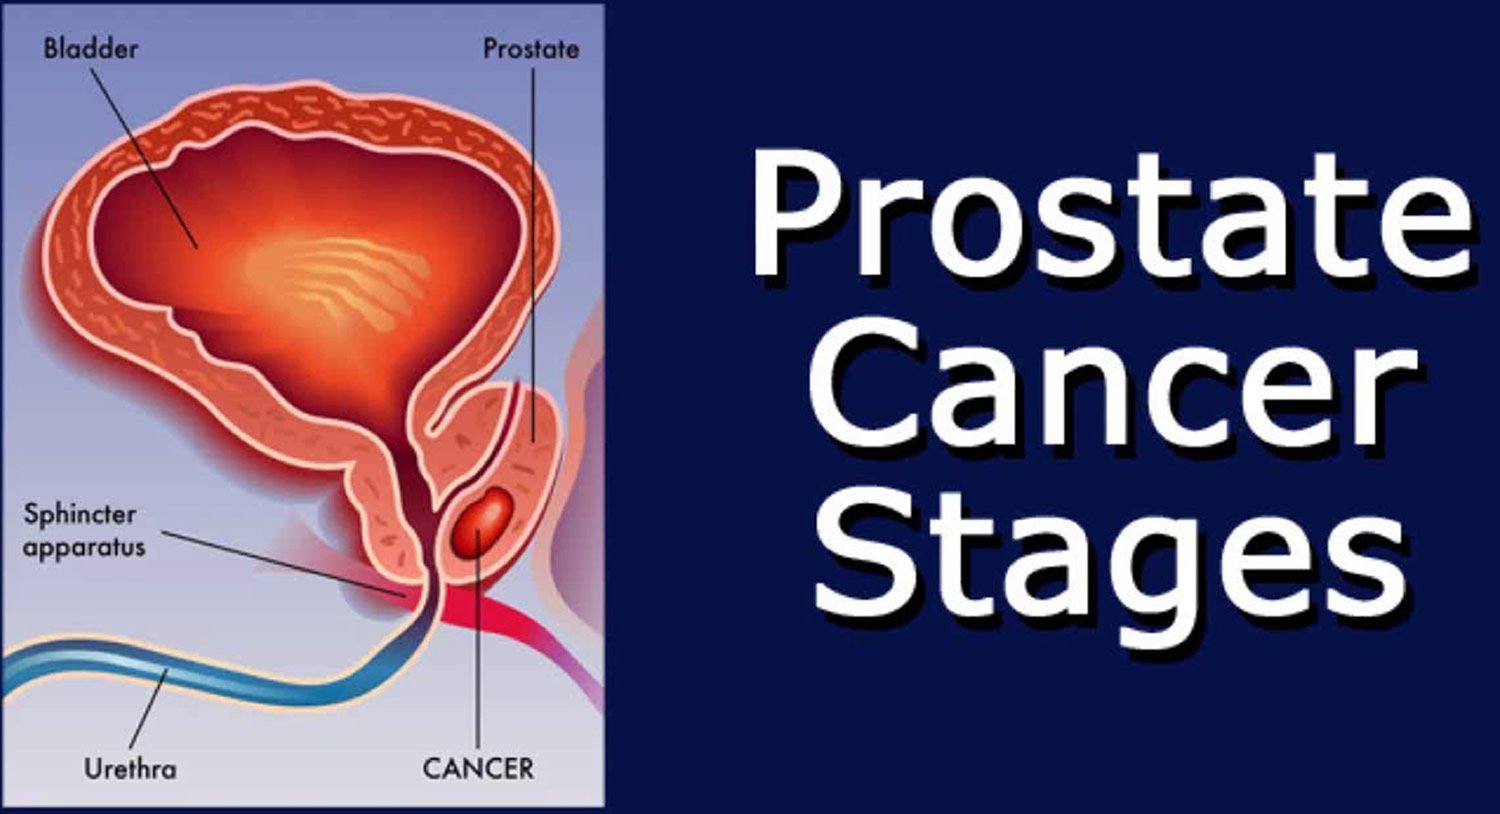 Prostate Cancer Signs and Symptoms. Diagnosis, Stages &  Treatment